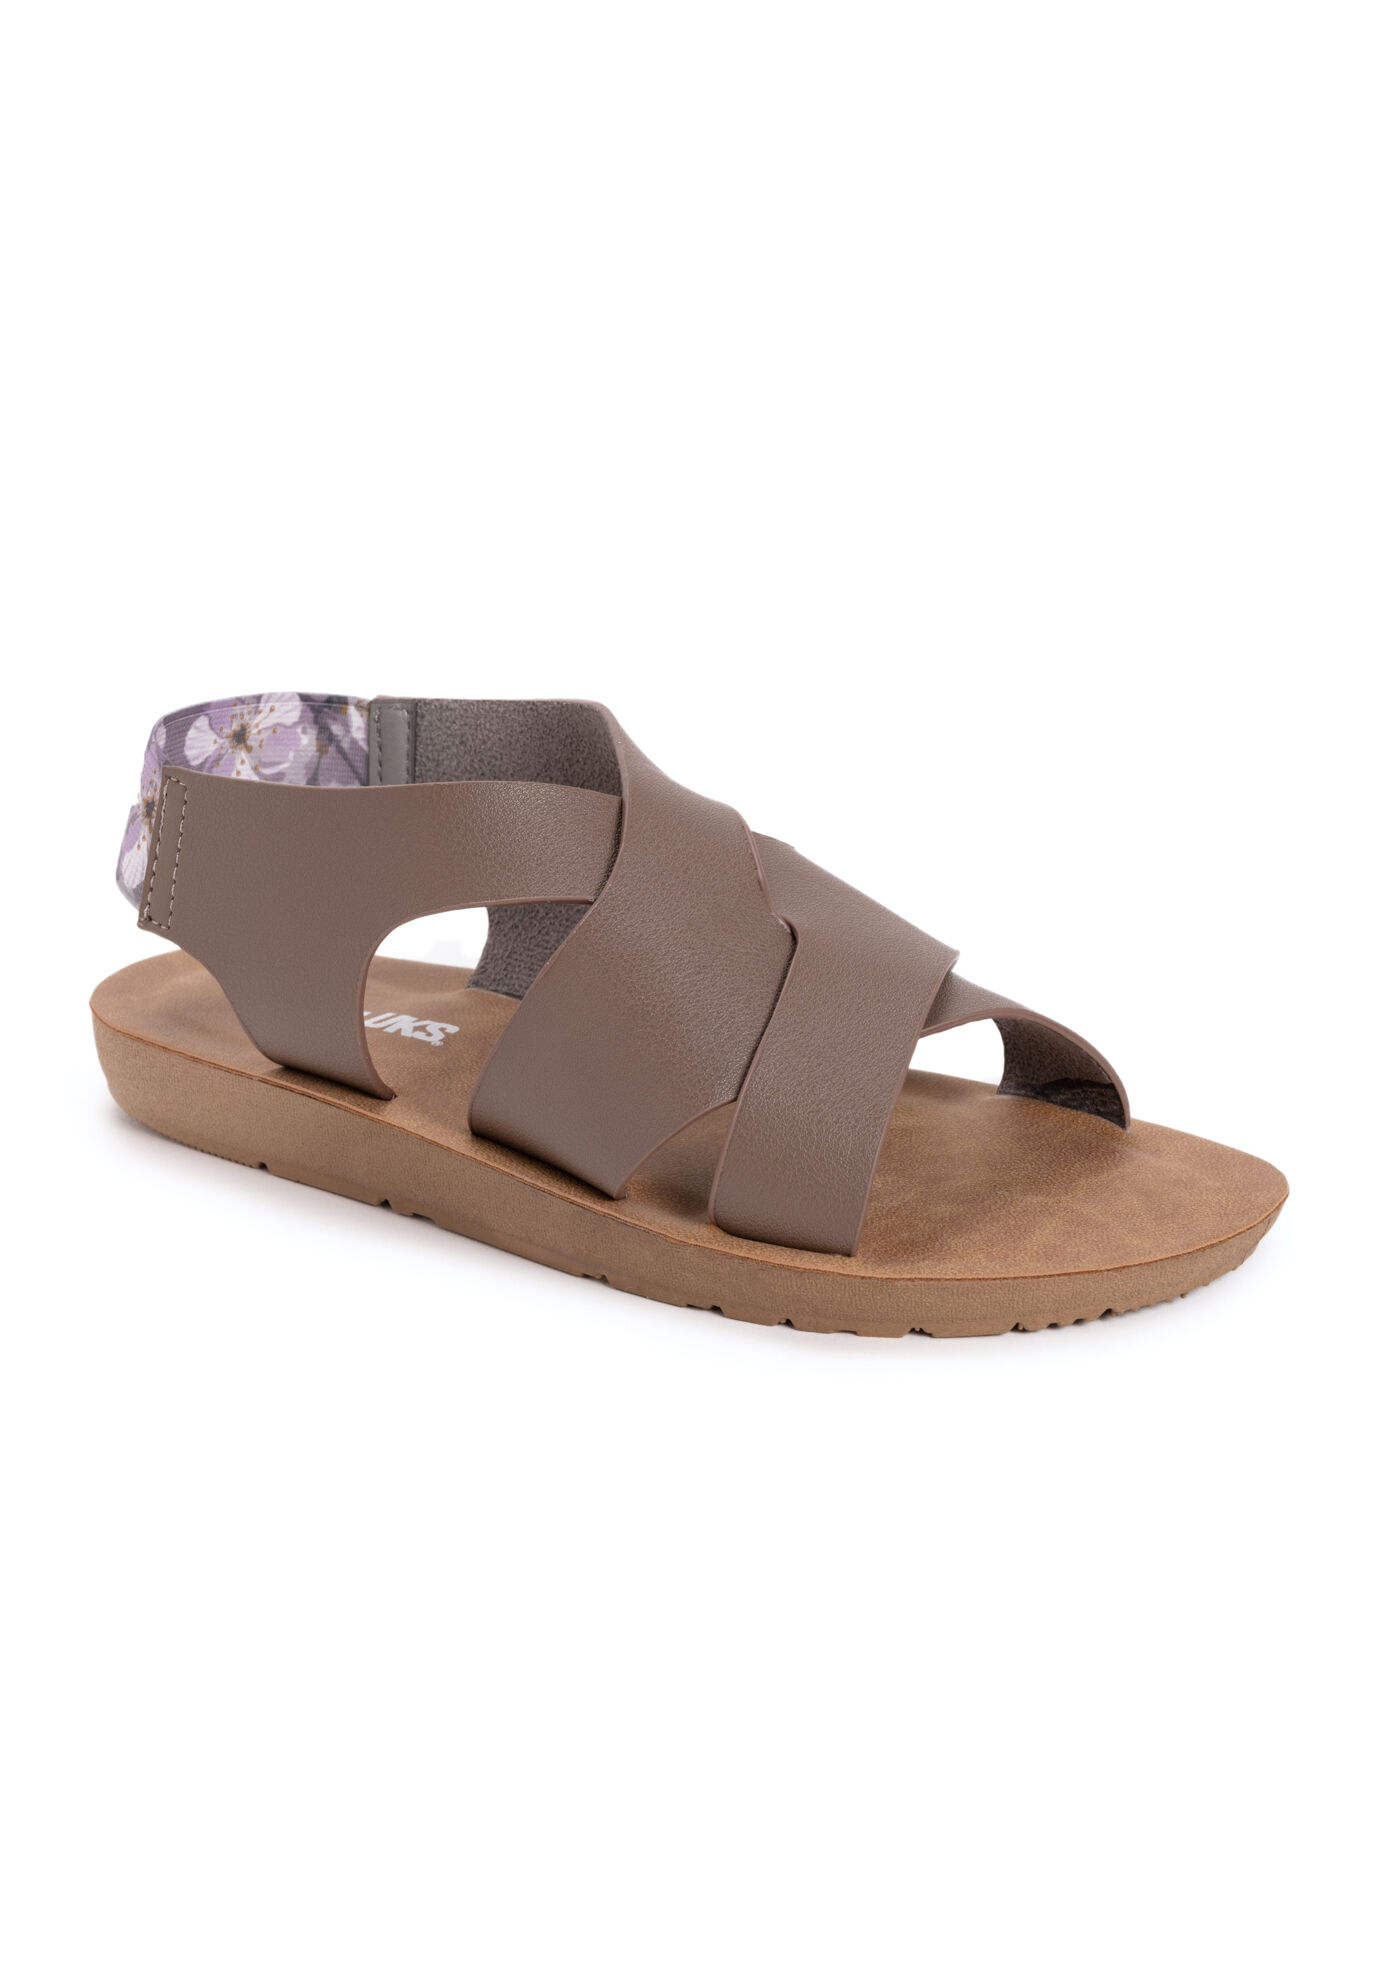 Women's About Mary Sandals by MUK LUKS in Grey (Size 8 M)